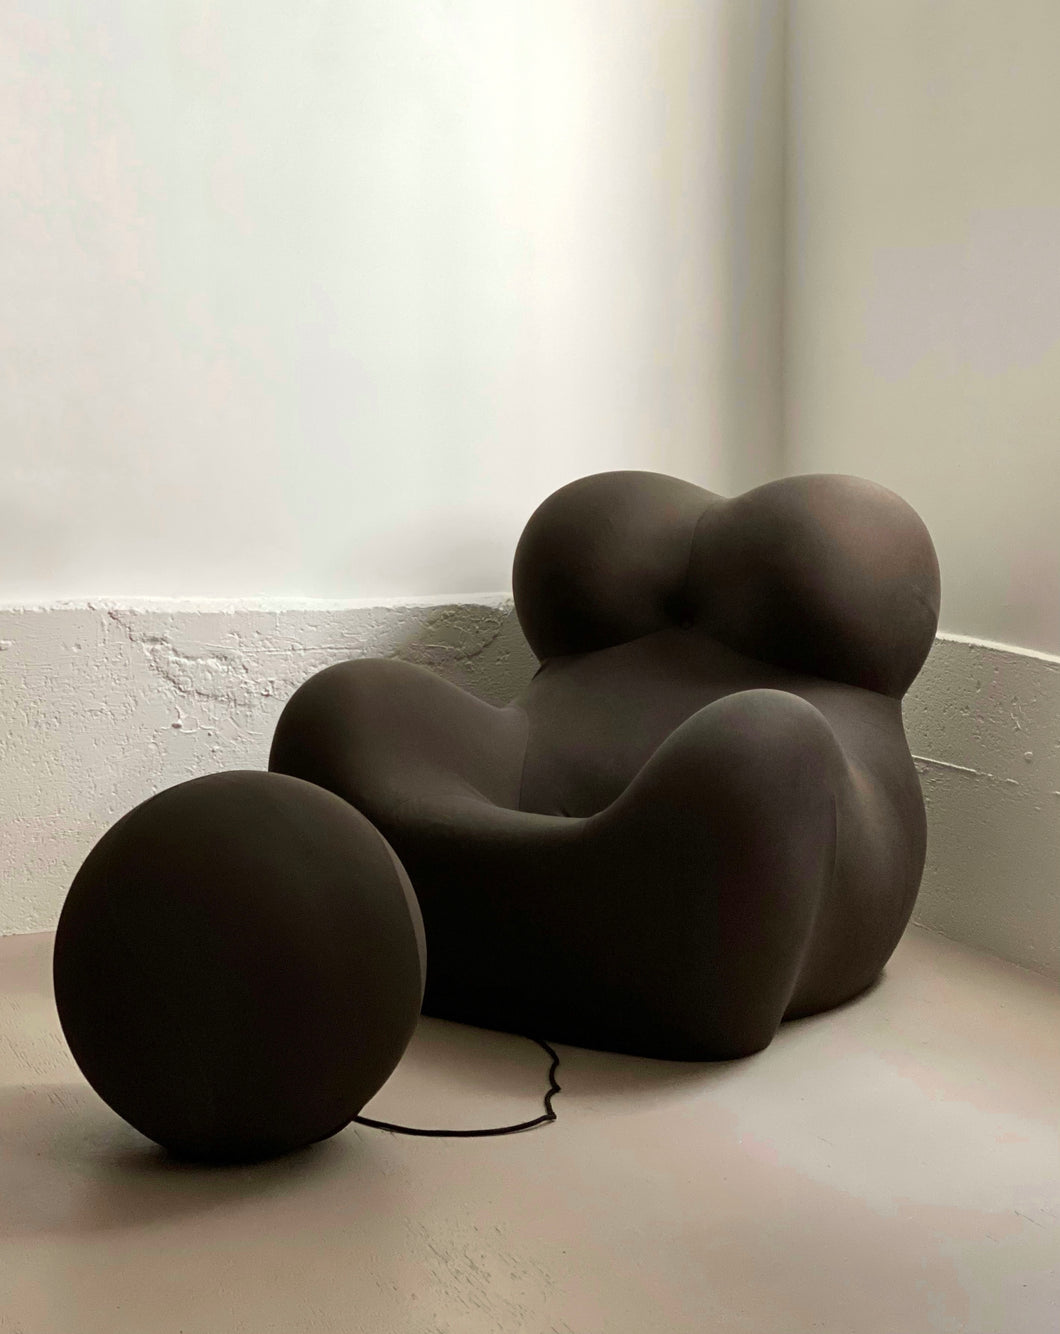 UP5 chair and UP6 ottoman by Gaetano Pesce for B&B Italia